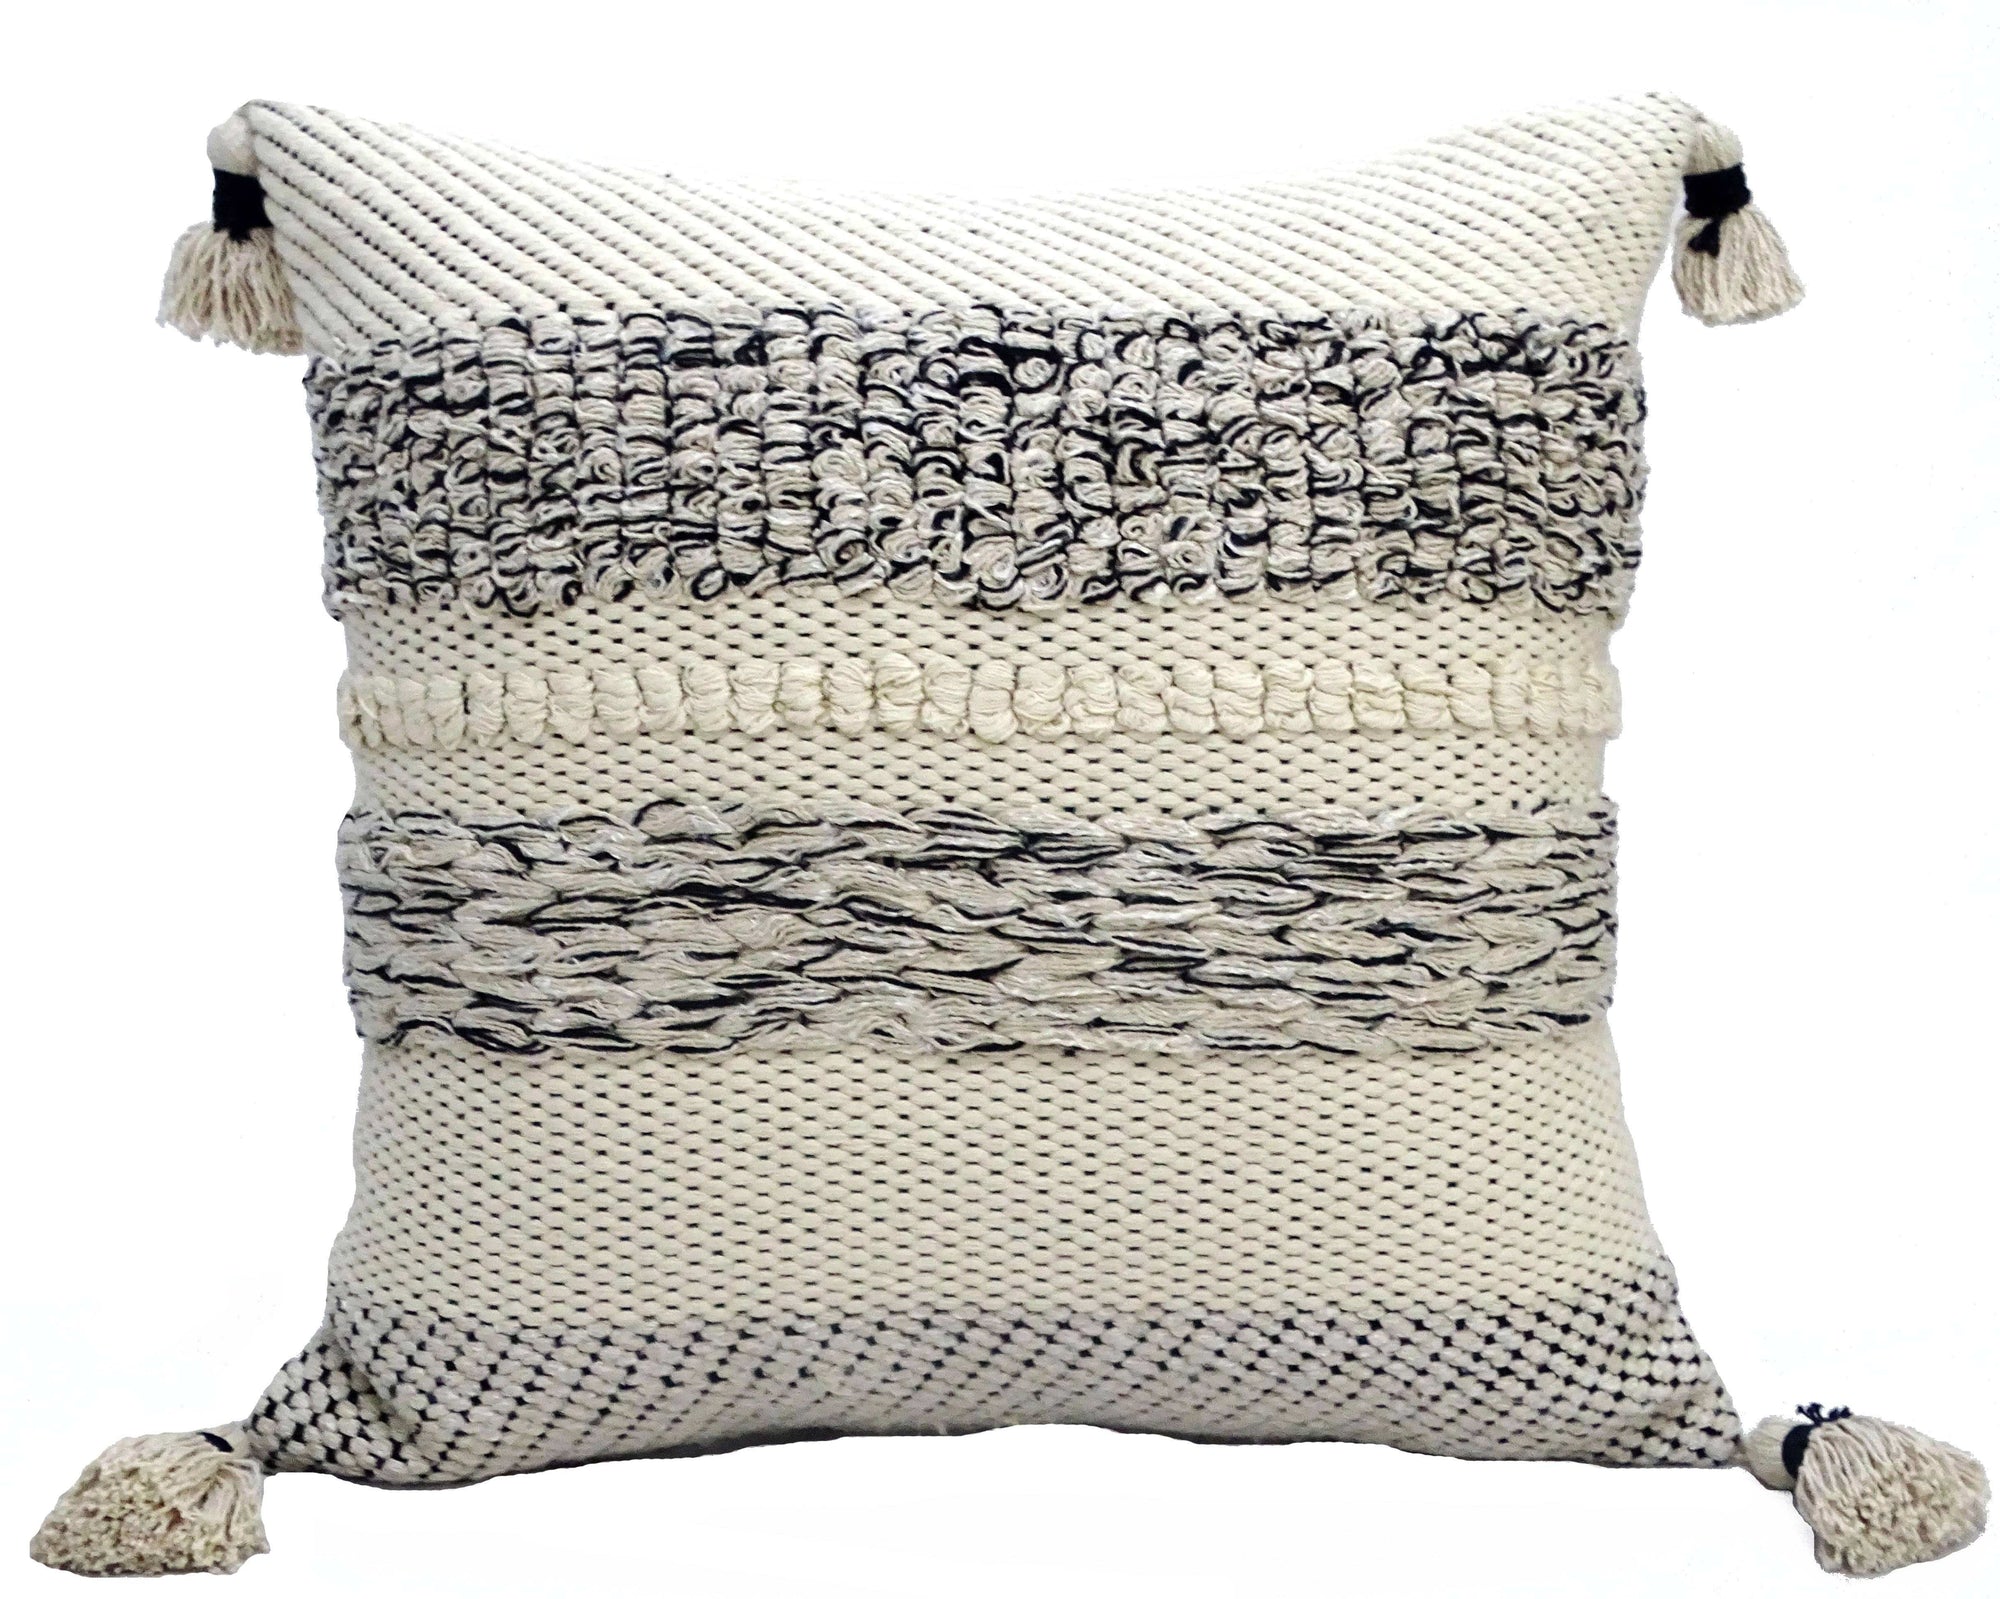 Vibhsa pillow Woven Throw Pillow with Tassels